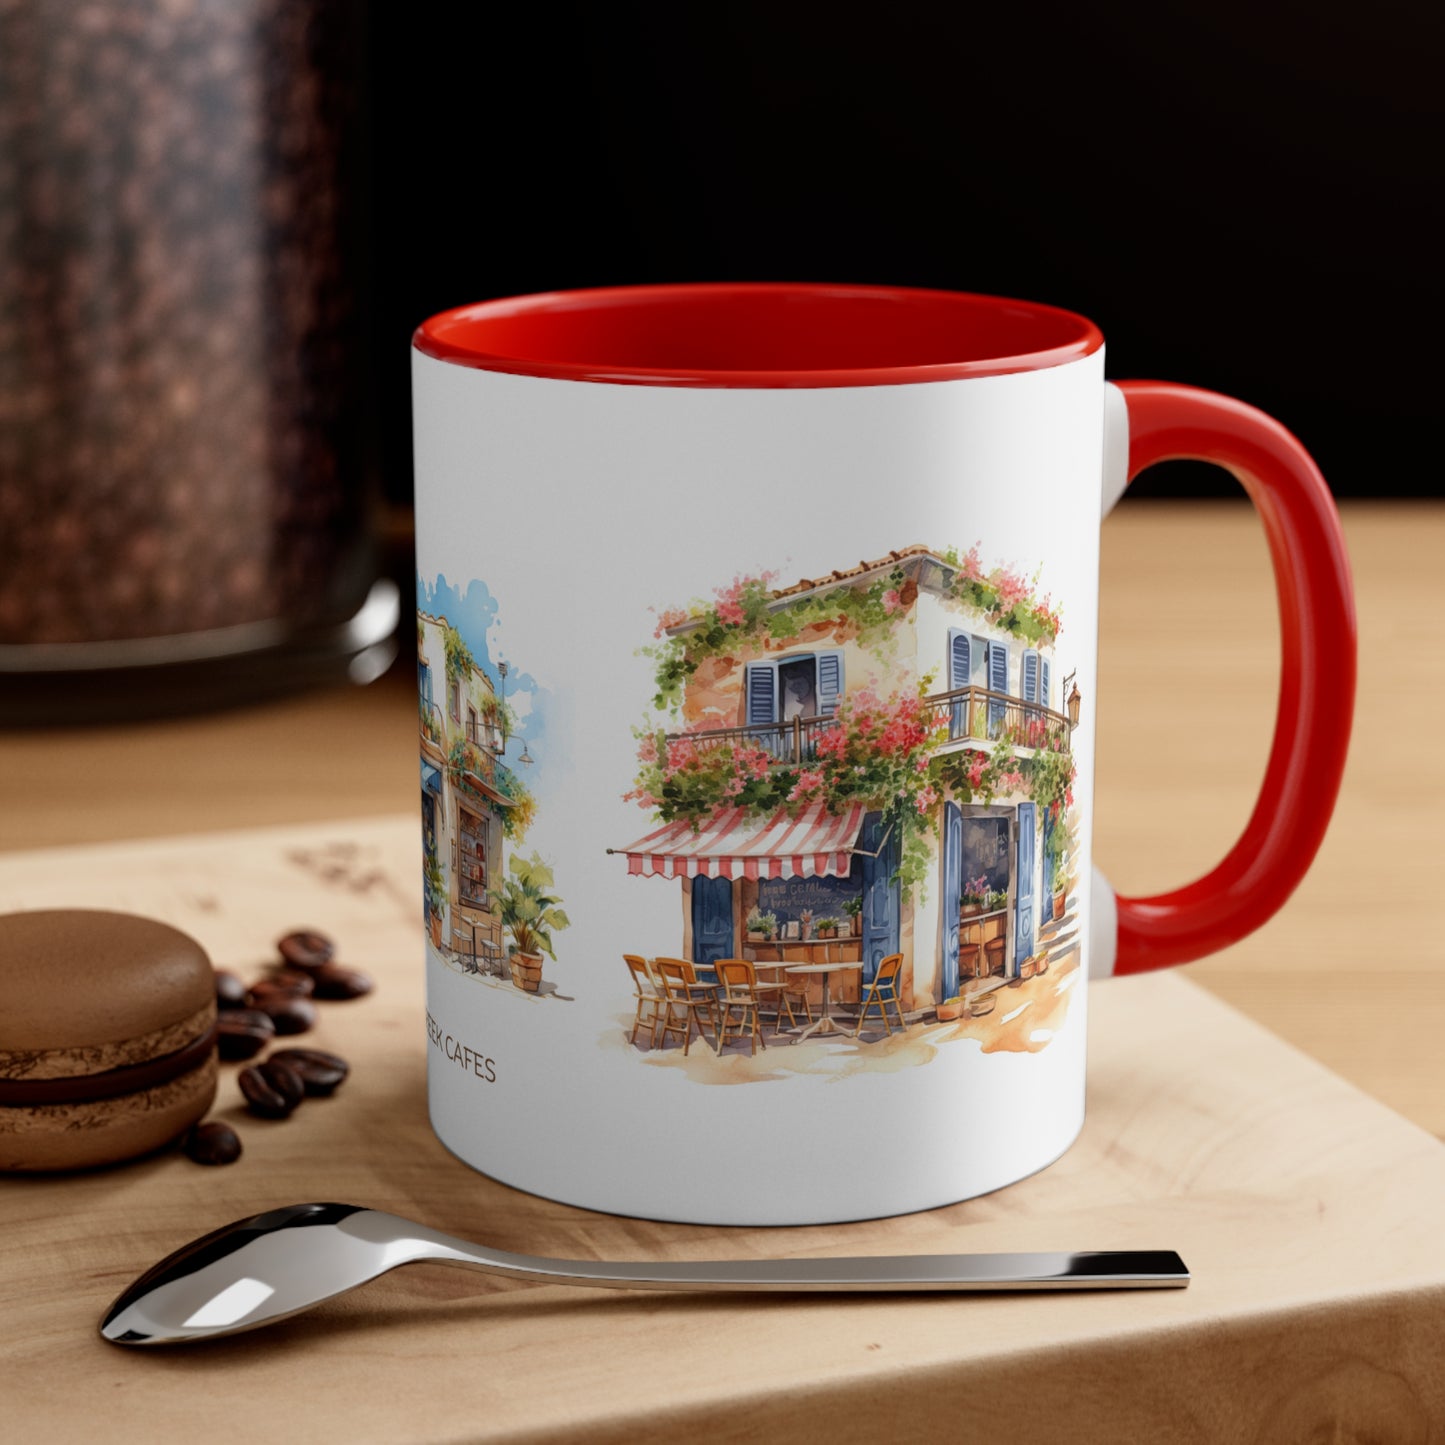 GREEK CAFES Amazing WATERCOLOR Mug - Blue, Red Accents - Mugscity - Free Shipping